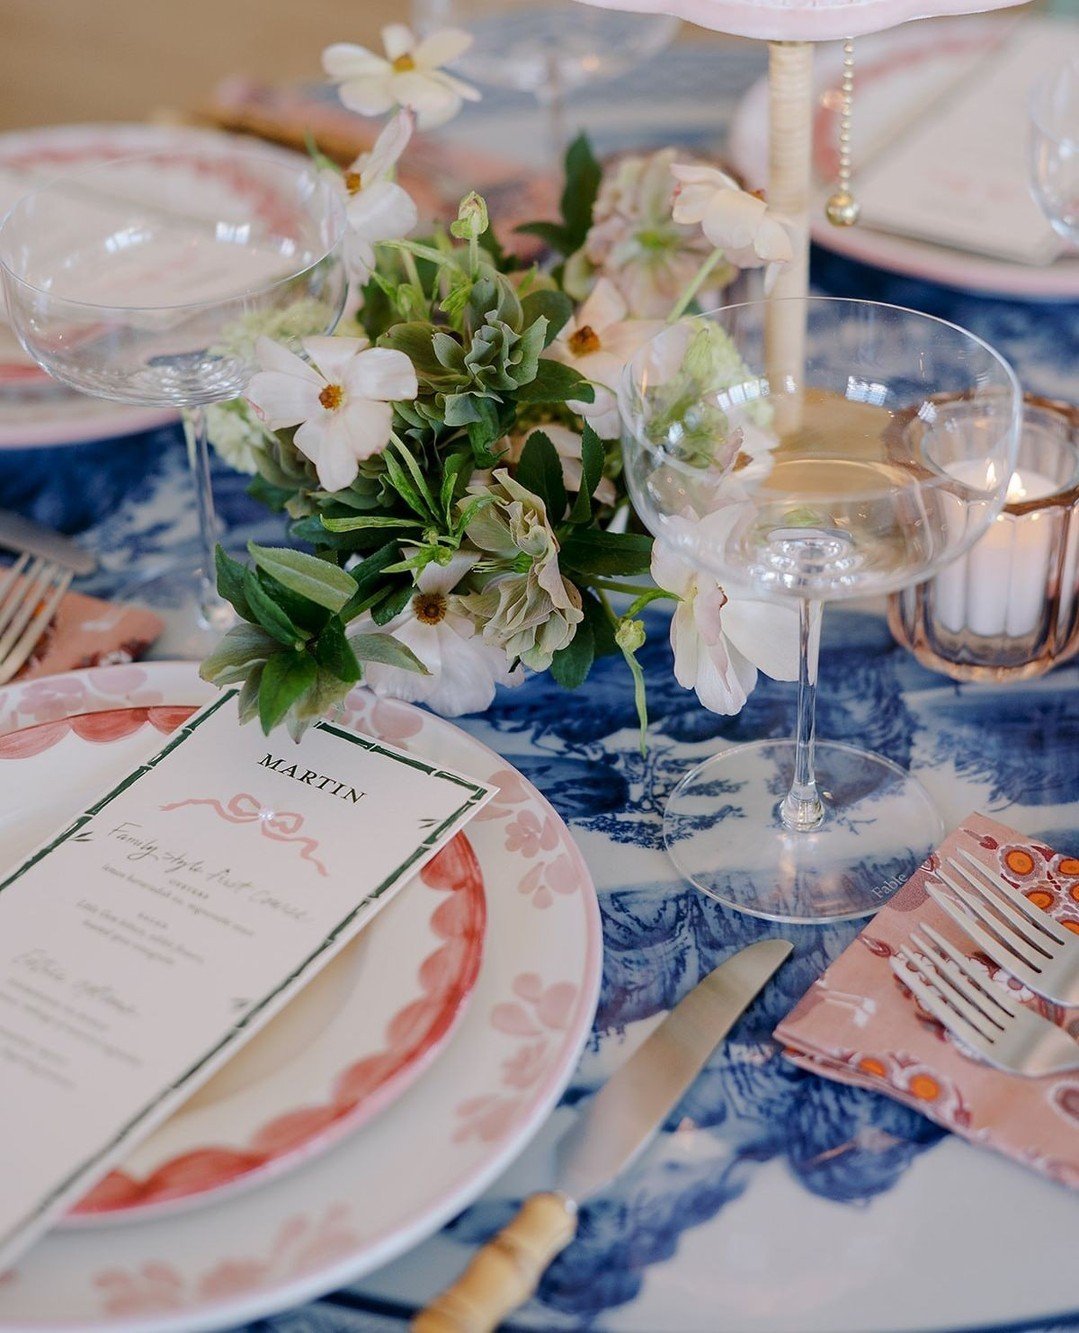 Yes, that's a pearl on the menu! What charming touches can you think of to add to your wedding invitation suite? ⁠
⁠
Check out the Gardiner suite (save the date, invite suite, and day-of stationery) as part of our KFD Collection for a whimsical, casu